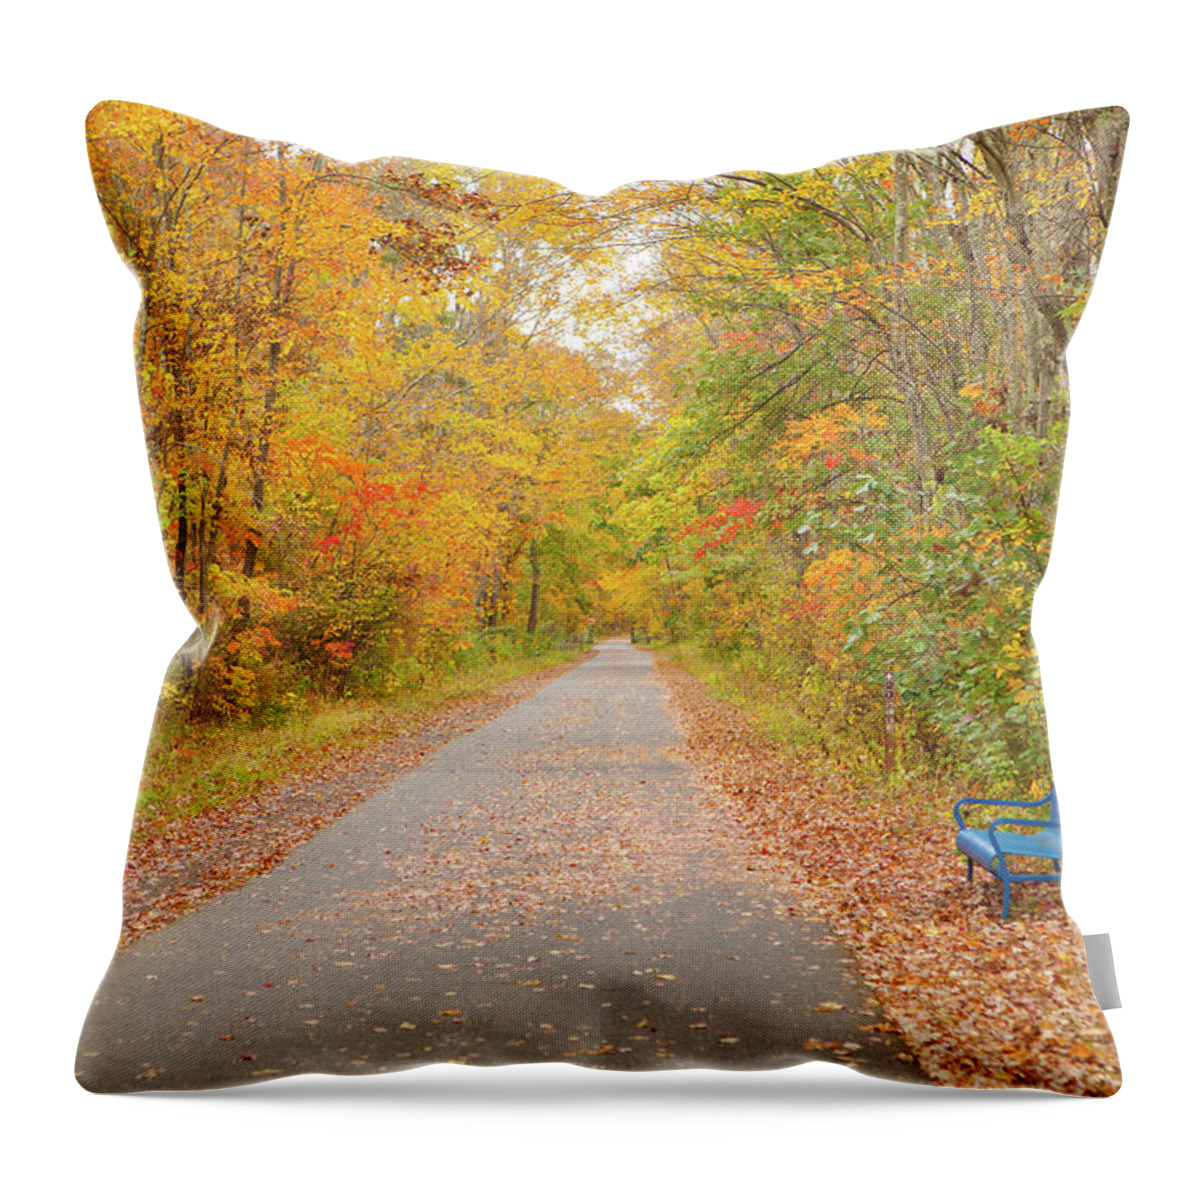 Connecticut Throw Pillow featuring the photograph Connecticut Foliage_8057 by Rocco Leone